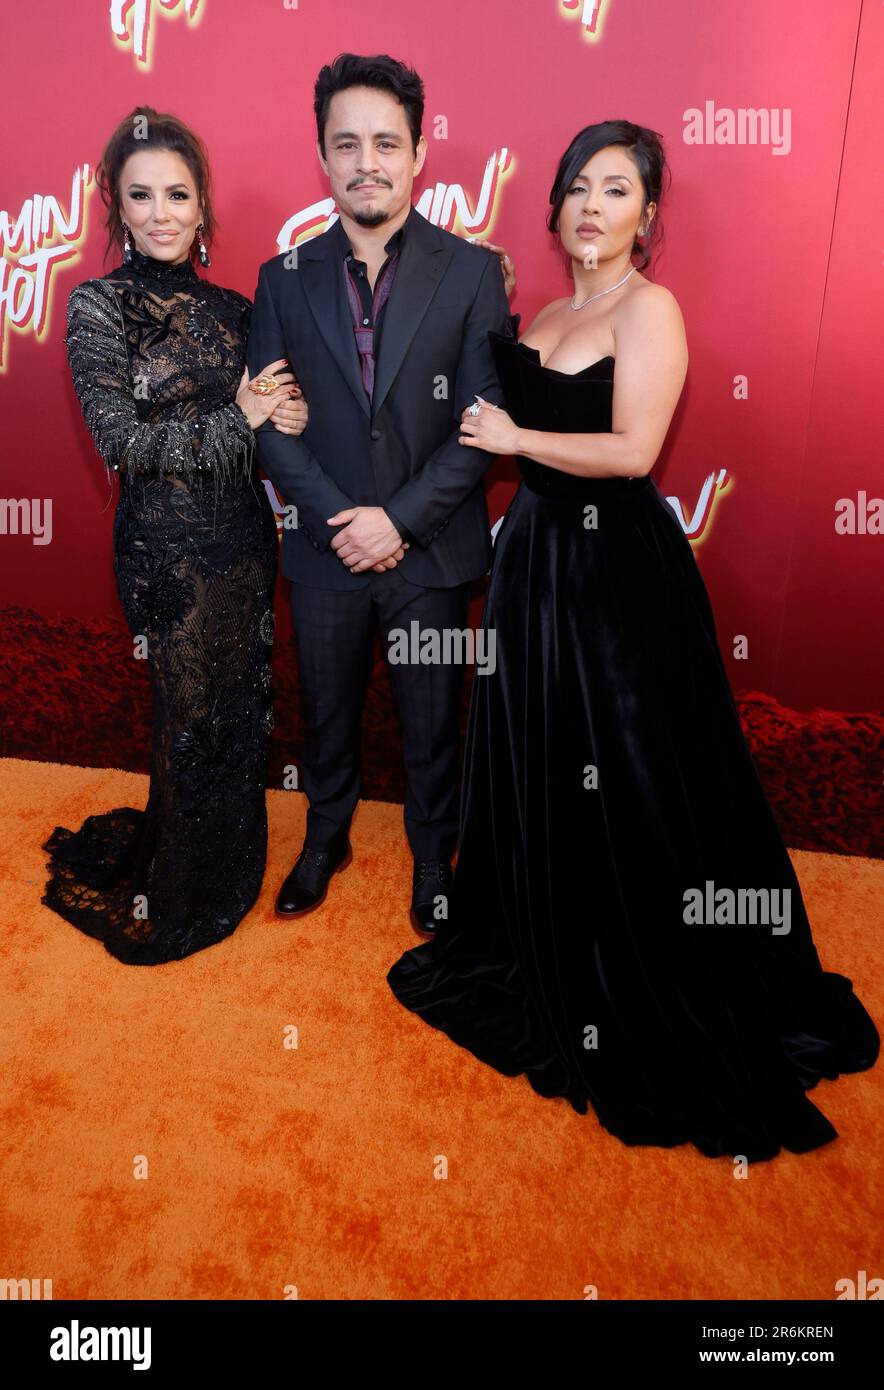 Los Angeles, Ca. 9th June, 2023. Jessie Garcia, Eva Longoria, Annie Gonzalez at the LA special screening of Flamin' Hot at Hollywood Post 43 in Los Angeles, California on June 9, 2023. Credit: Faye Sadou/Media Punch/Alamy Live News Stock Photo